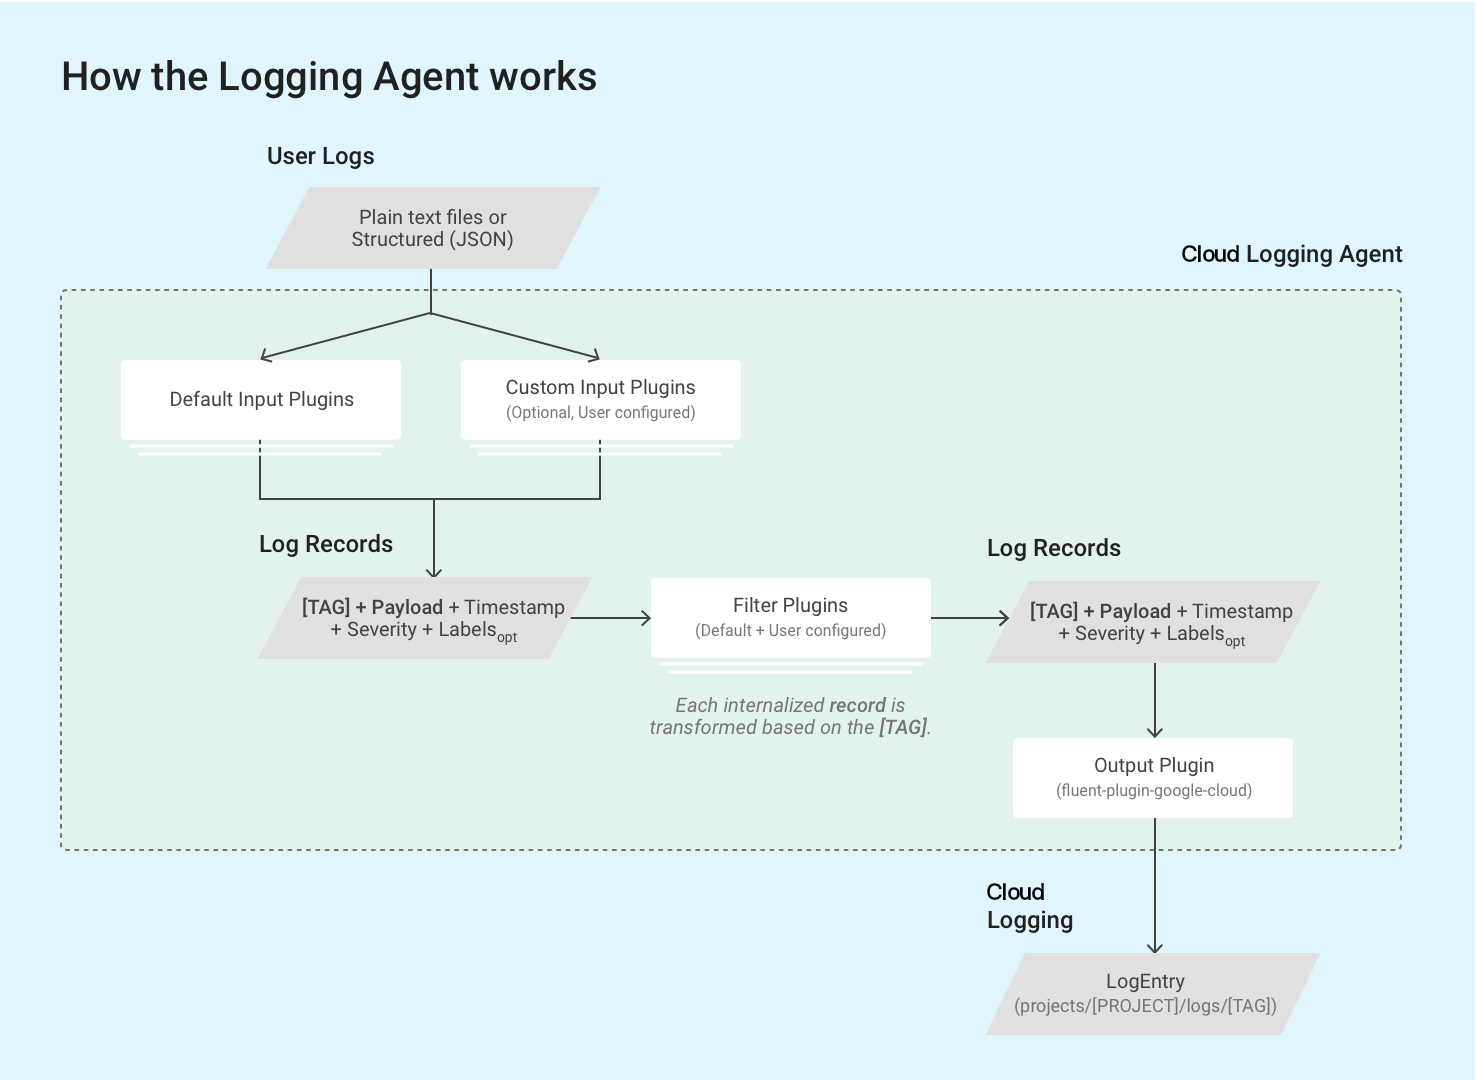 Funktionsweise des Logging-Agents